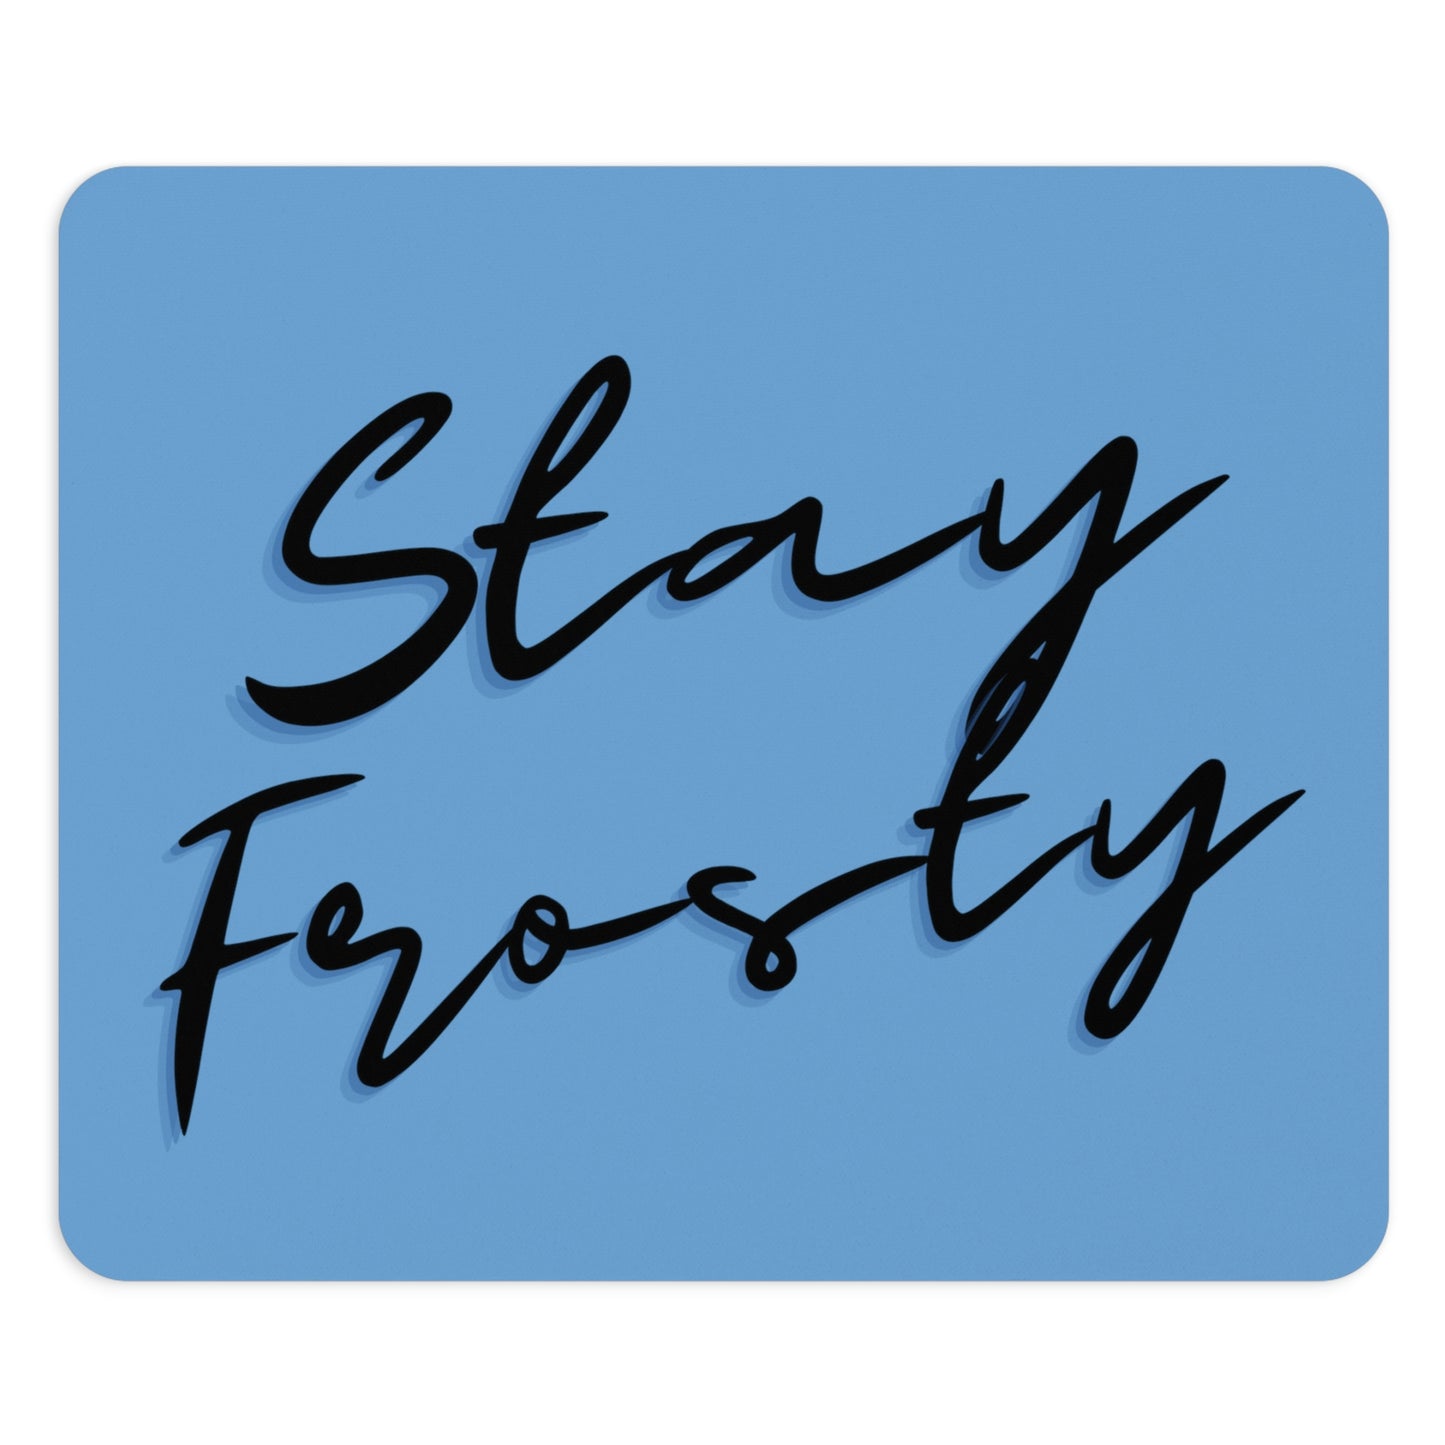 The Stay Frosty Blue Mouse Pad is a blue mouse pad with the phrase "stay frosty" written in stylish black cursive script.